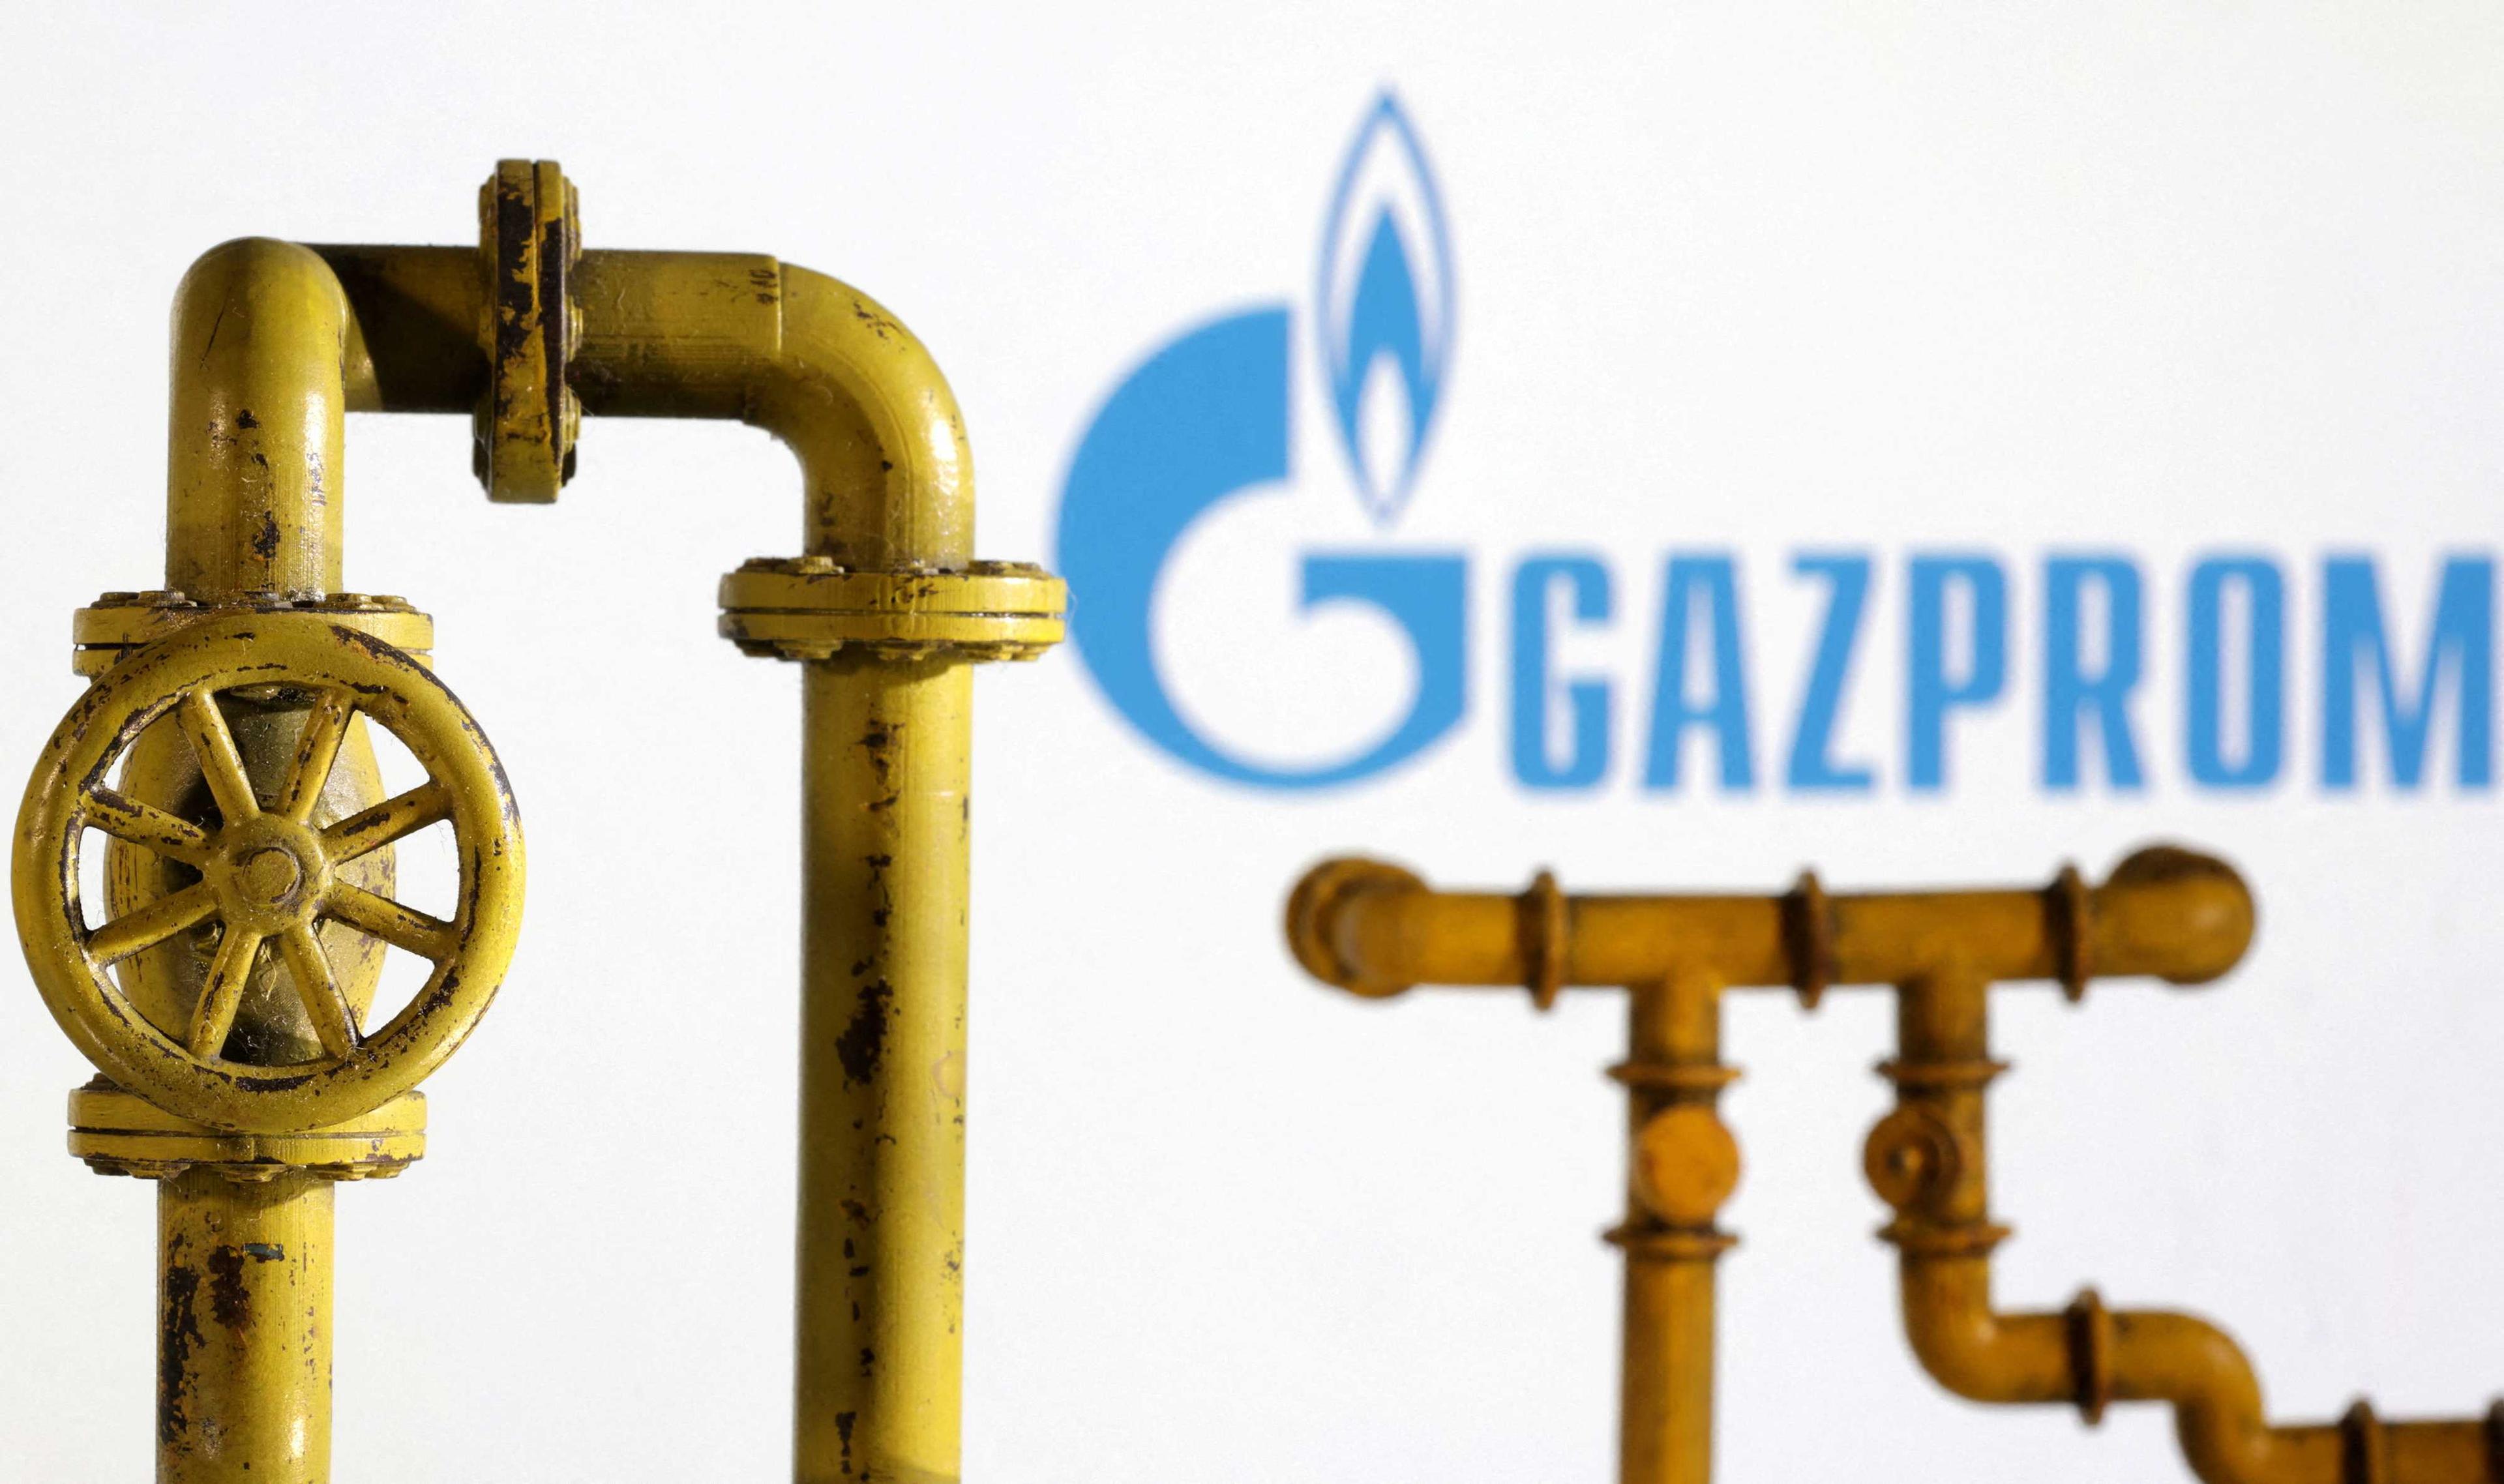 Model of natural gas pipeline and Gazprom logo, July 18. Photo: Reuters